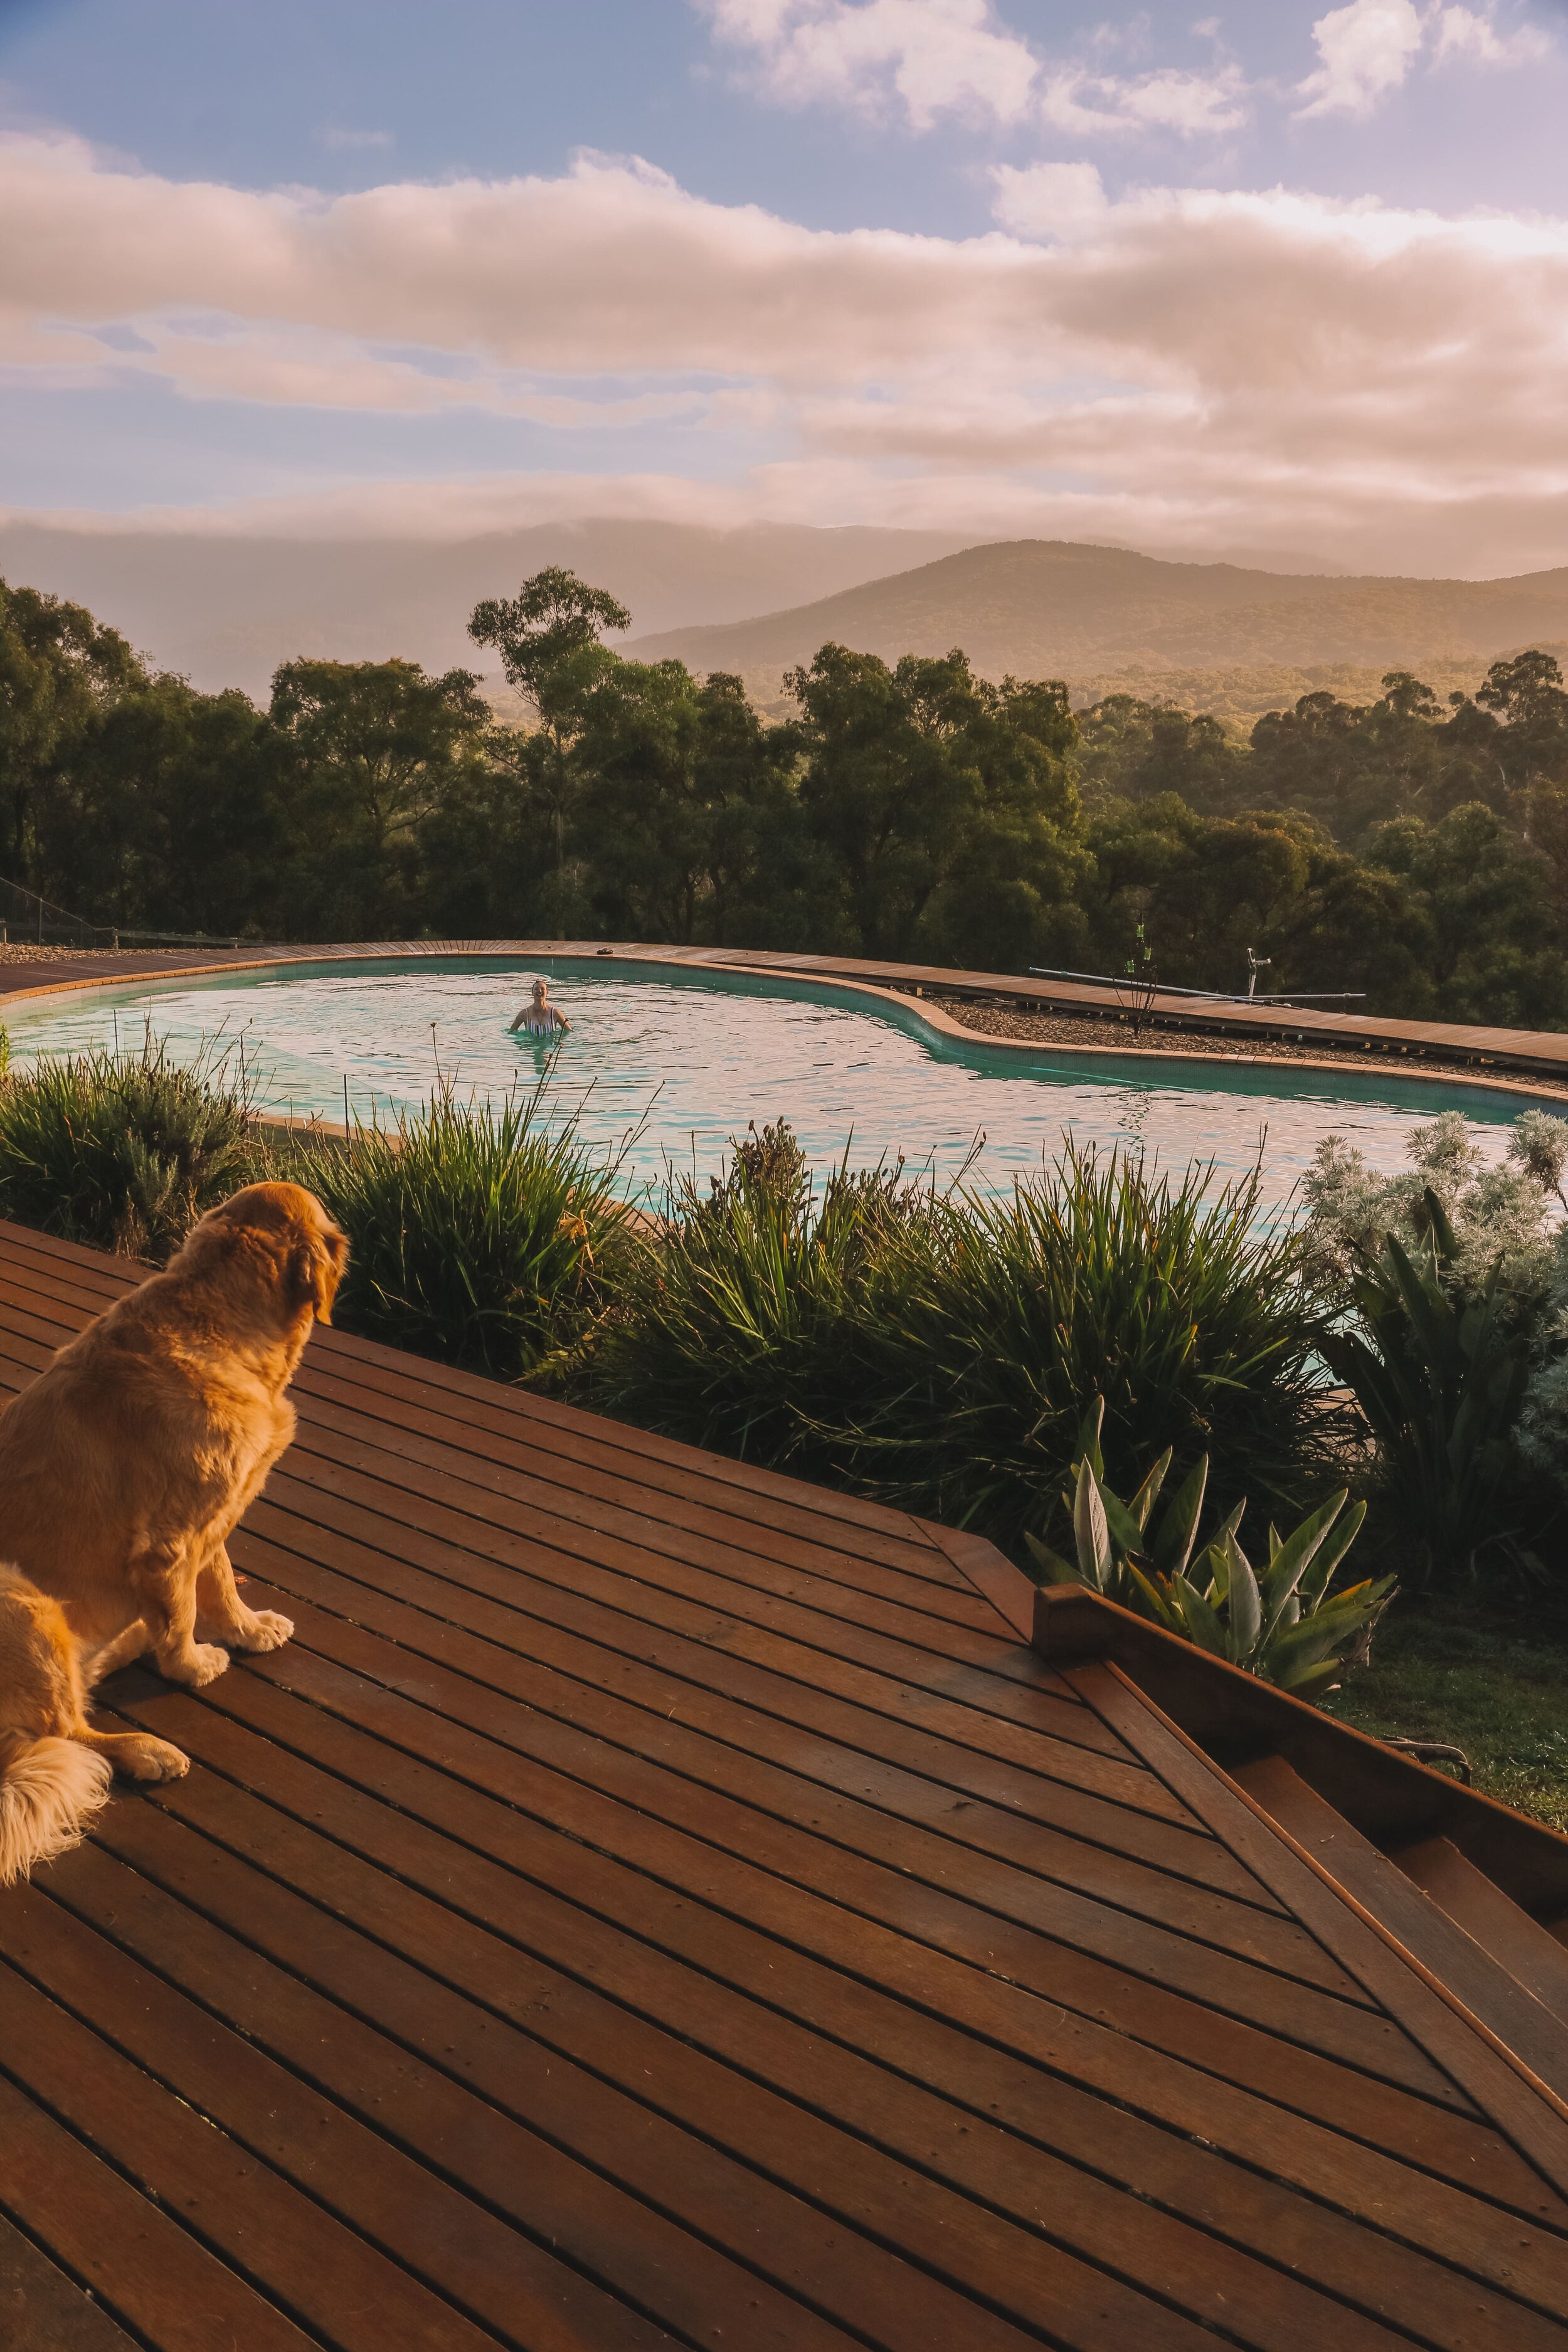 The most spectacular Yarra Valley Lodge you have to stay in: Yarra Valley accommodation | Where to stay Yarra Valley | Yarra Valley hotel | yarra valley travel | 5 star accommodation Yarra Valley | luxury escapes Yarra Valley | Yarra Valley boutique…